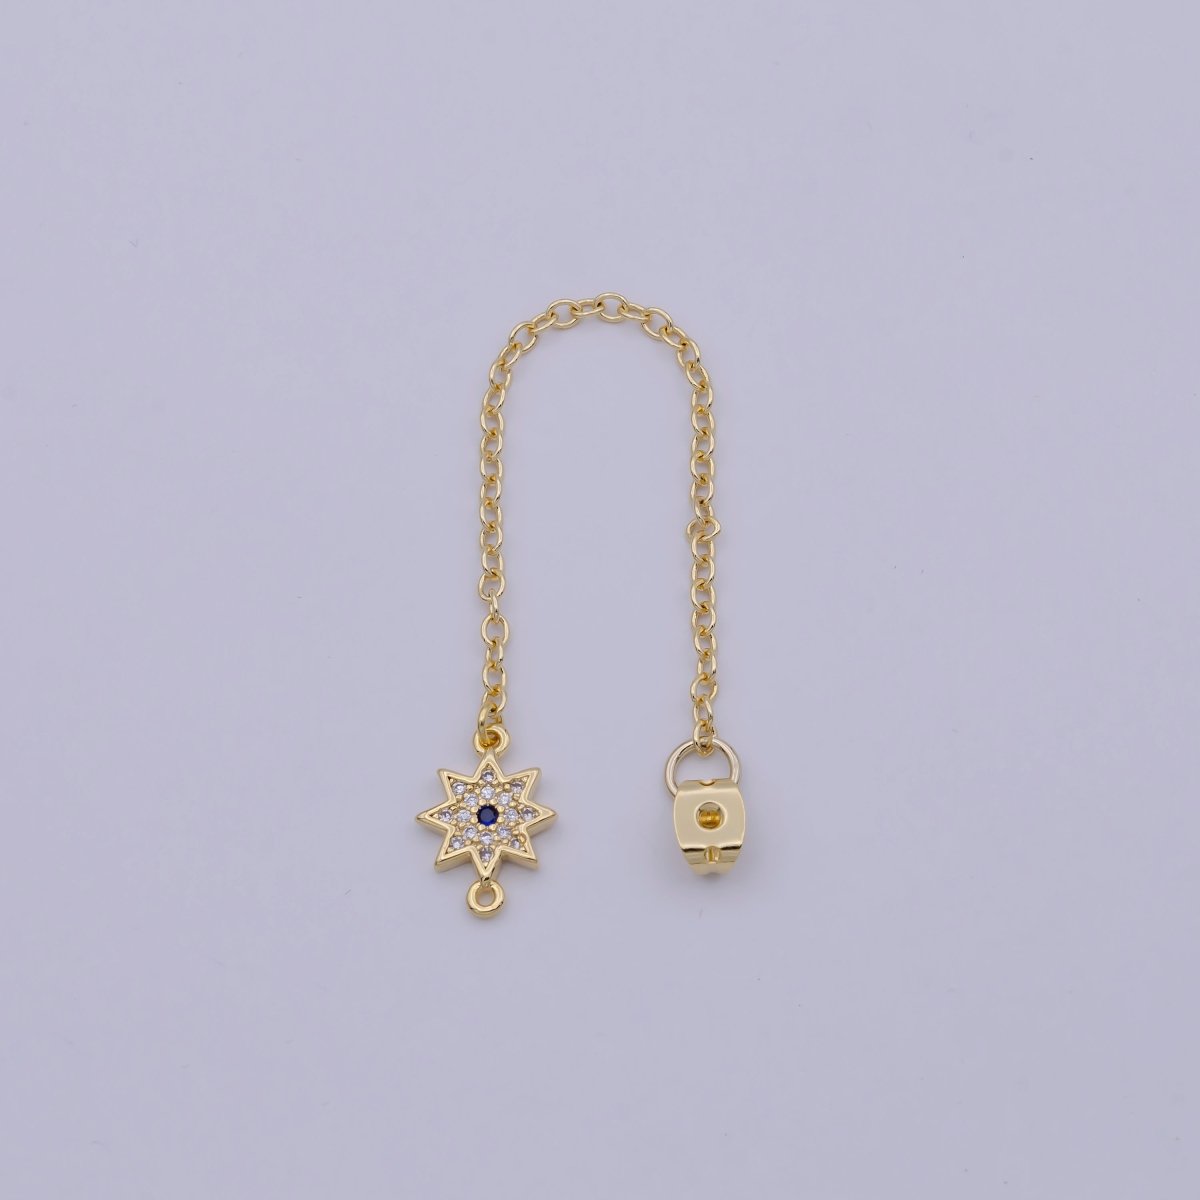 Back stopper w/ chain cz North Star Charm 2 pcs Gold Filled Nickel free, Butterfly clutch chain Dainty earring back K-198 - DLUXCA